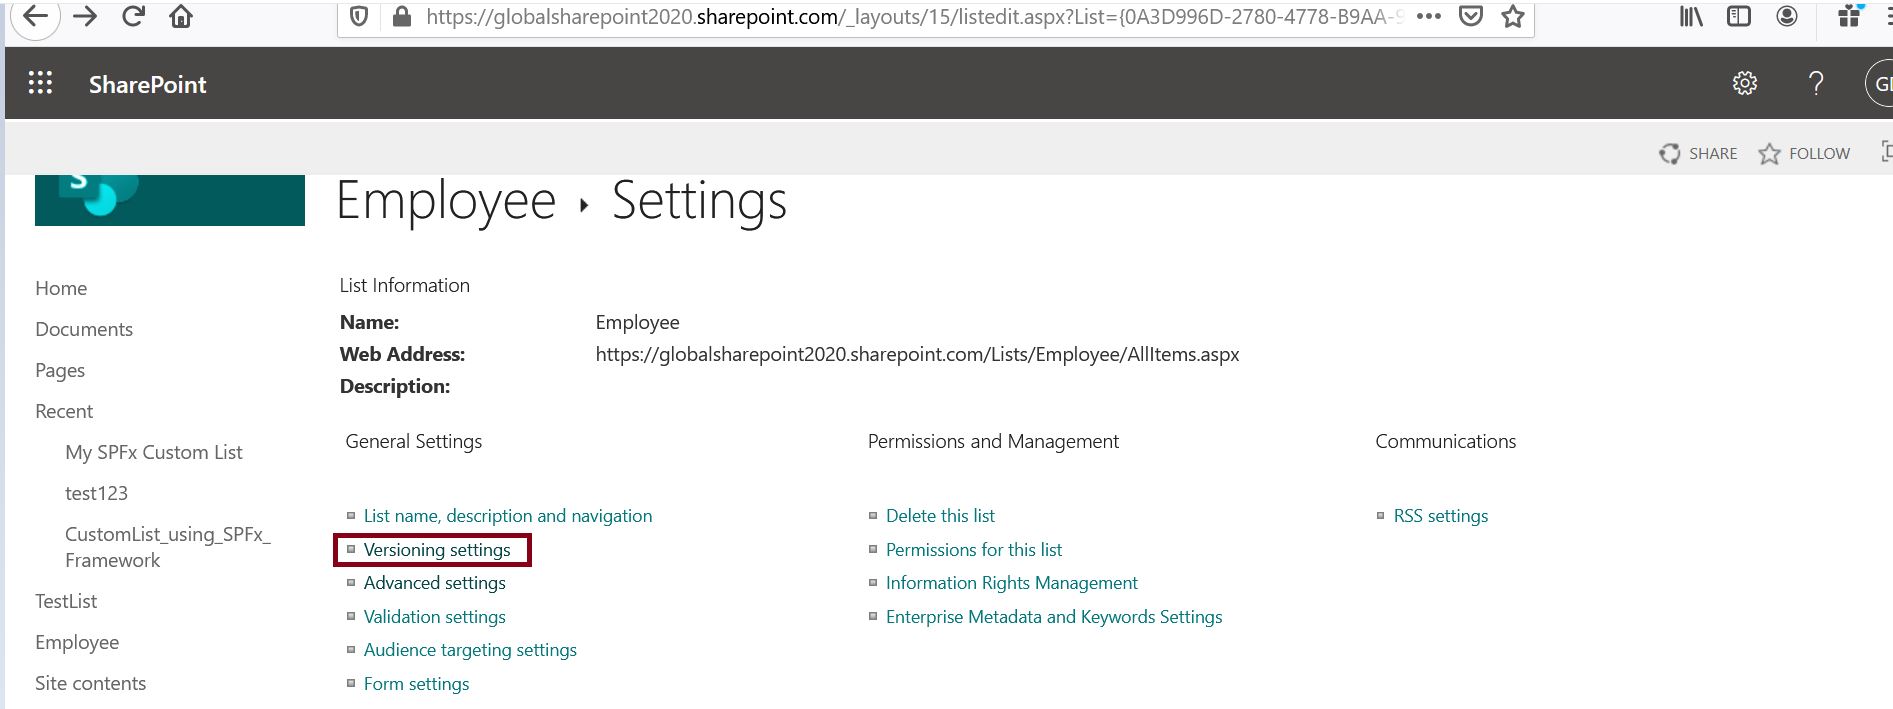 Enable versioning settings in the SharePoint list